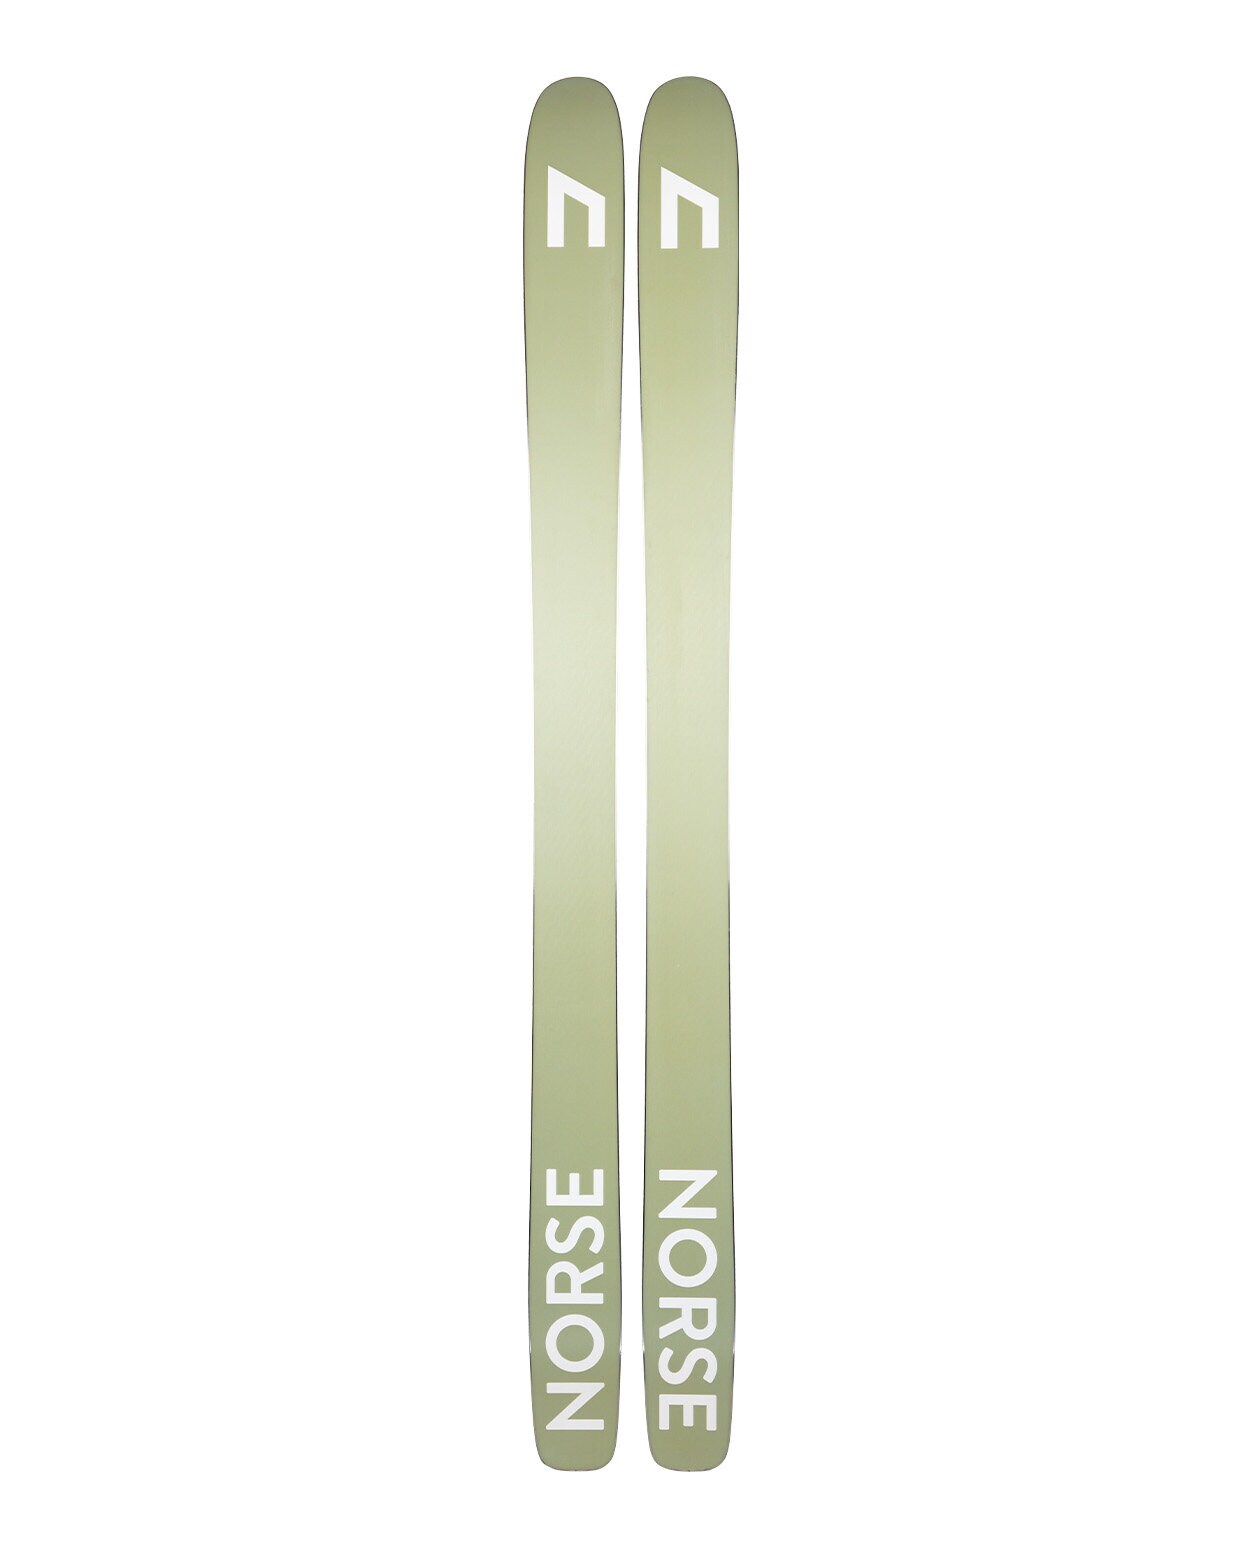 Norse Skis The Freeride 22/23